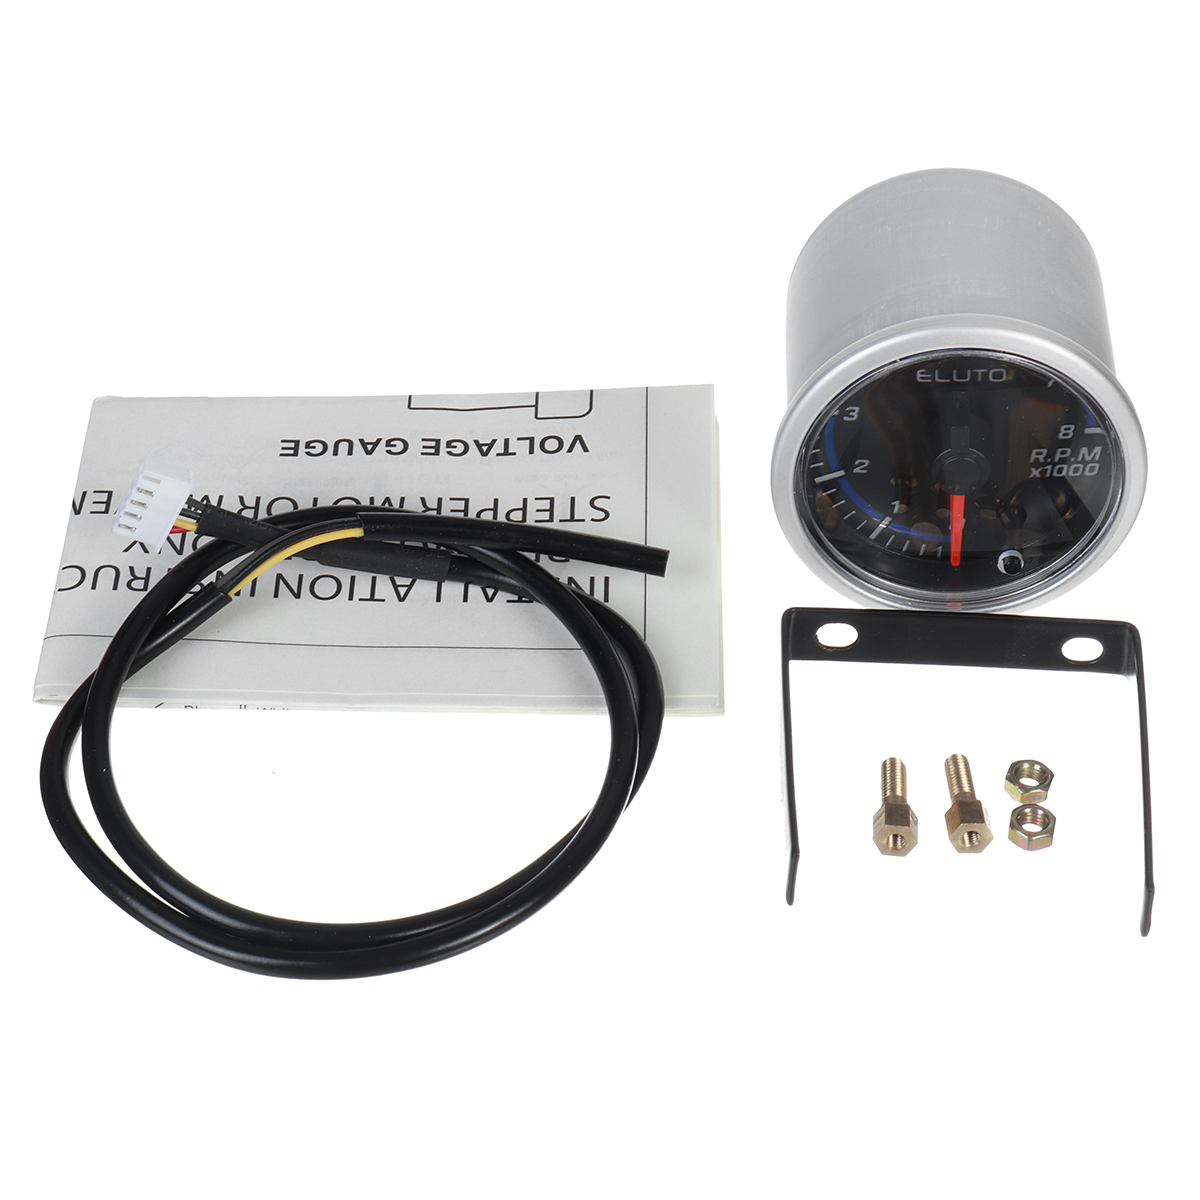 2 inch 52mm Electrical Tachometer Gauge For 0-8000 RPM LED Display Universal